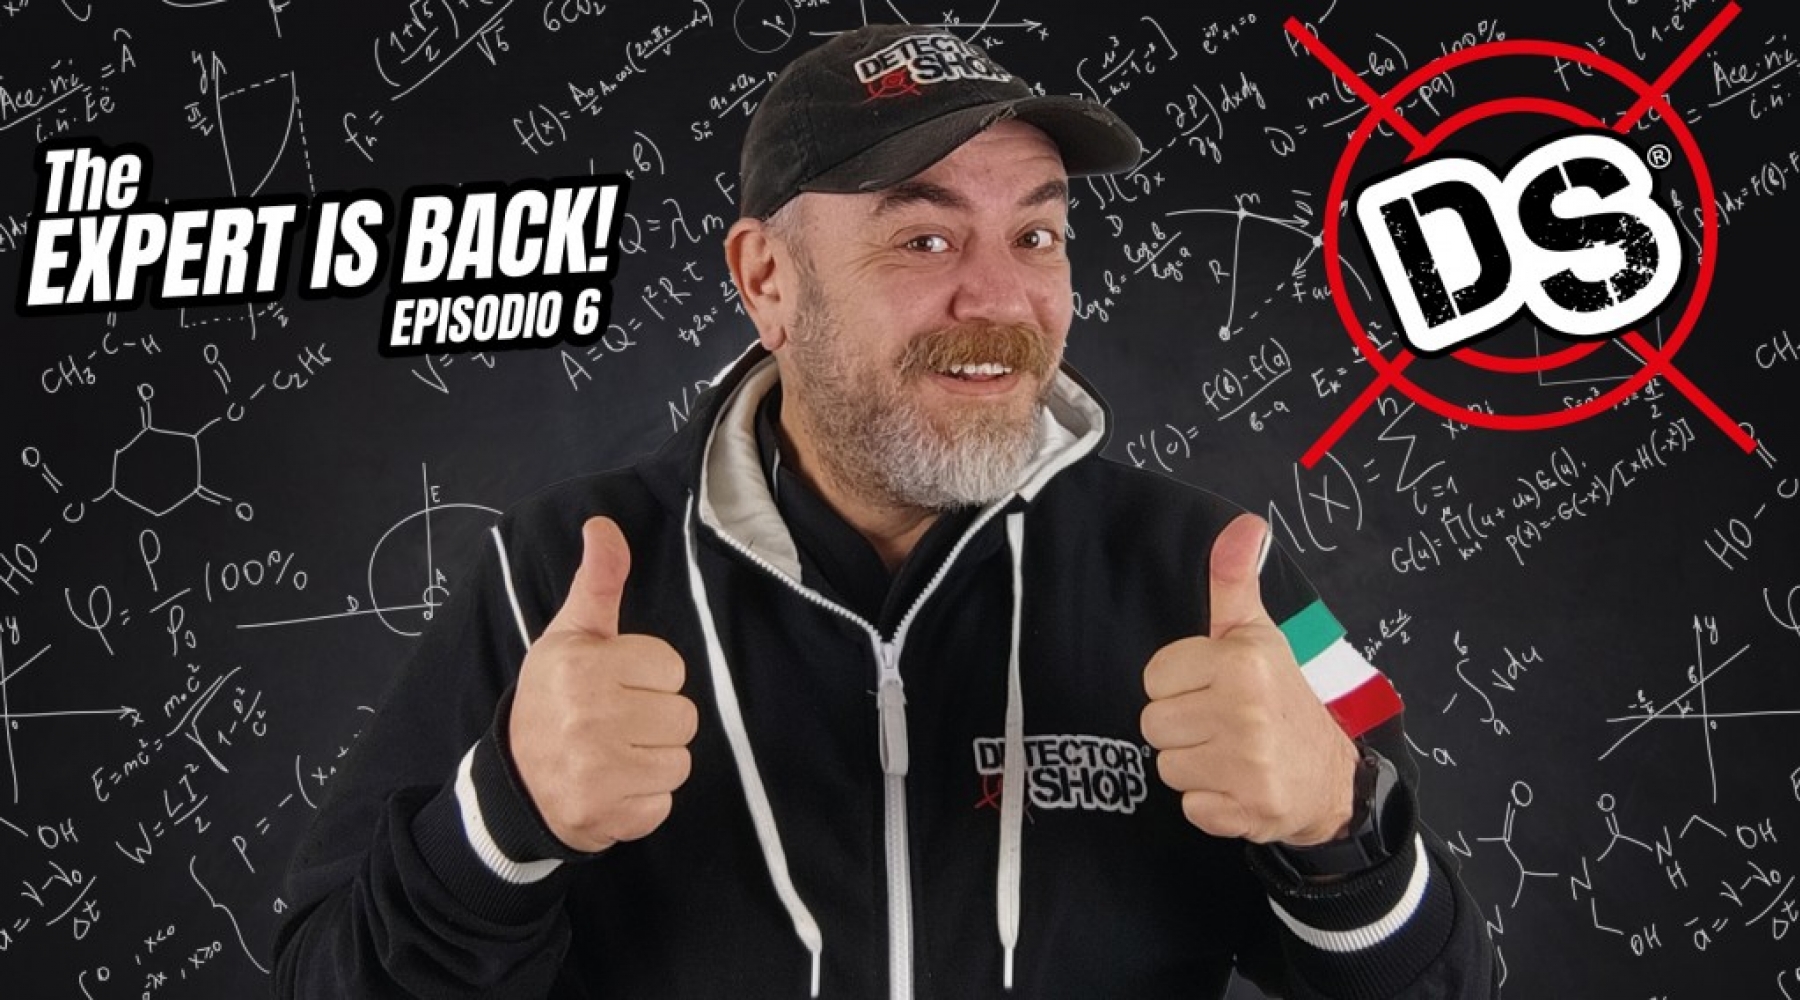 The Expert is Back! Ep. 6 ti aspetta